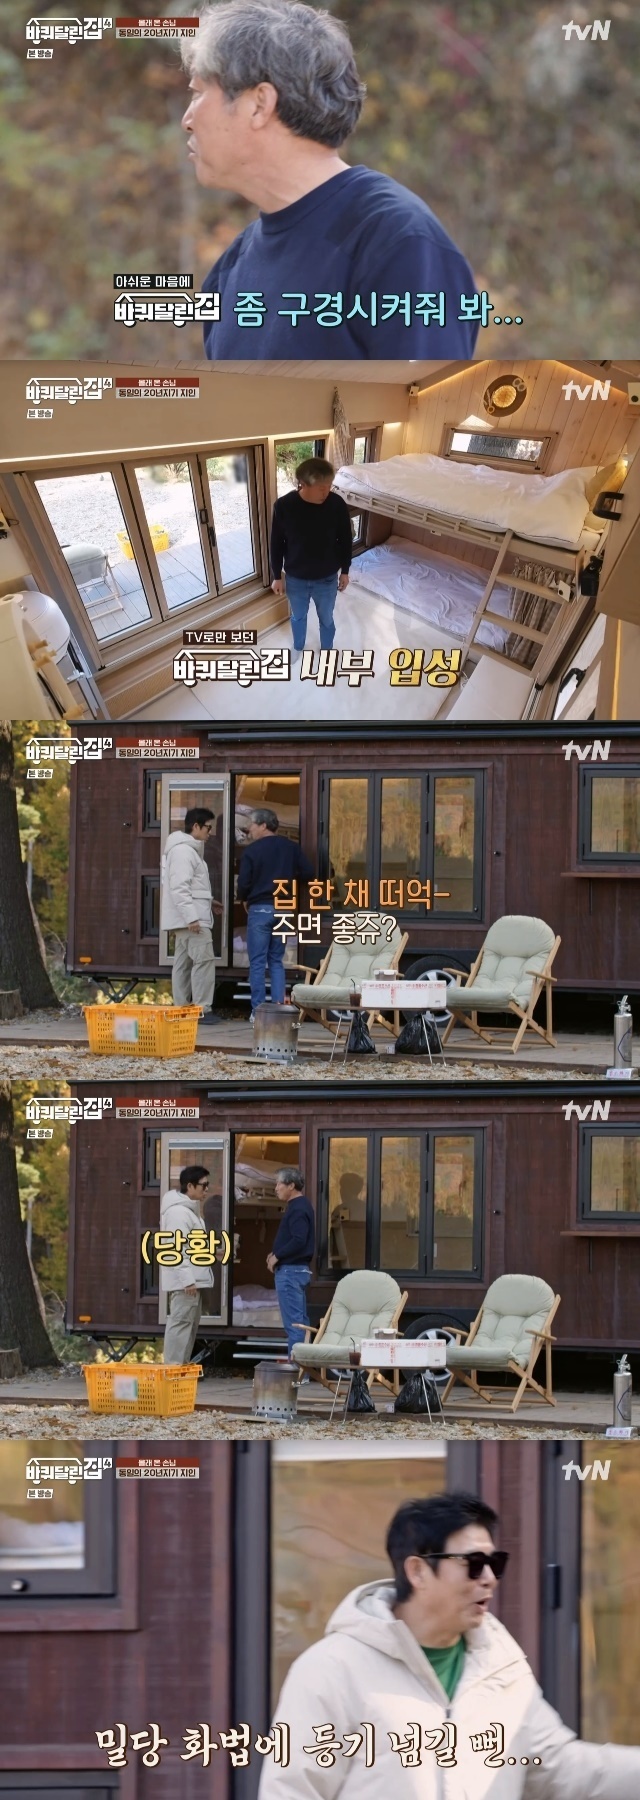 Sung Dong-il was embarrassed by the demand for a house of 20 years old.Sung Dong-ils 20-year-old acquaintance visited our front yard in the 7th episode of tvN entertainment House on Wheels 4 (hereinafter referred to as Badal House 4) broadcast on November 24th.On that day, Sung Dong-il first found the front yard alone without Kim Hee-won, who was late to join the morning shooting, and RO WOON, who met the guests. Chungbuk Provincial College Whale Village Maple Forest.While Sung Dong-il was sitting alone in the beautiful autumn scenery, a truck pulled into the front yard and Sung Dong-il was more than happy to greet him.The identity of the guest was the acquaintance of Sung Dong-il, who lives in Chungbuk Provincial College, which has appeared directly on the side.Last time, he had been looking for a natural pine tree, and this time he came back with a lot of precious food. Among the ingredients, Acquaintances wife also attracted attention because of his carefully written acorns.When Sung Dong-il asked for money, Acquaintance said, Leave it alone. When Sung Dong-il tried to send him back, he asked, Let me see the house with wheels.I just want to go in once, he said. I liked the house, he said. How do you plan to use it in the future? It would be nice to have a house like this. I wish I had a house like this.He said, Do you want to go to the mountain until you die?